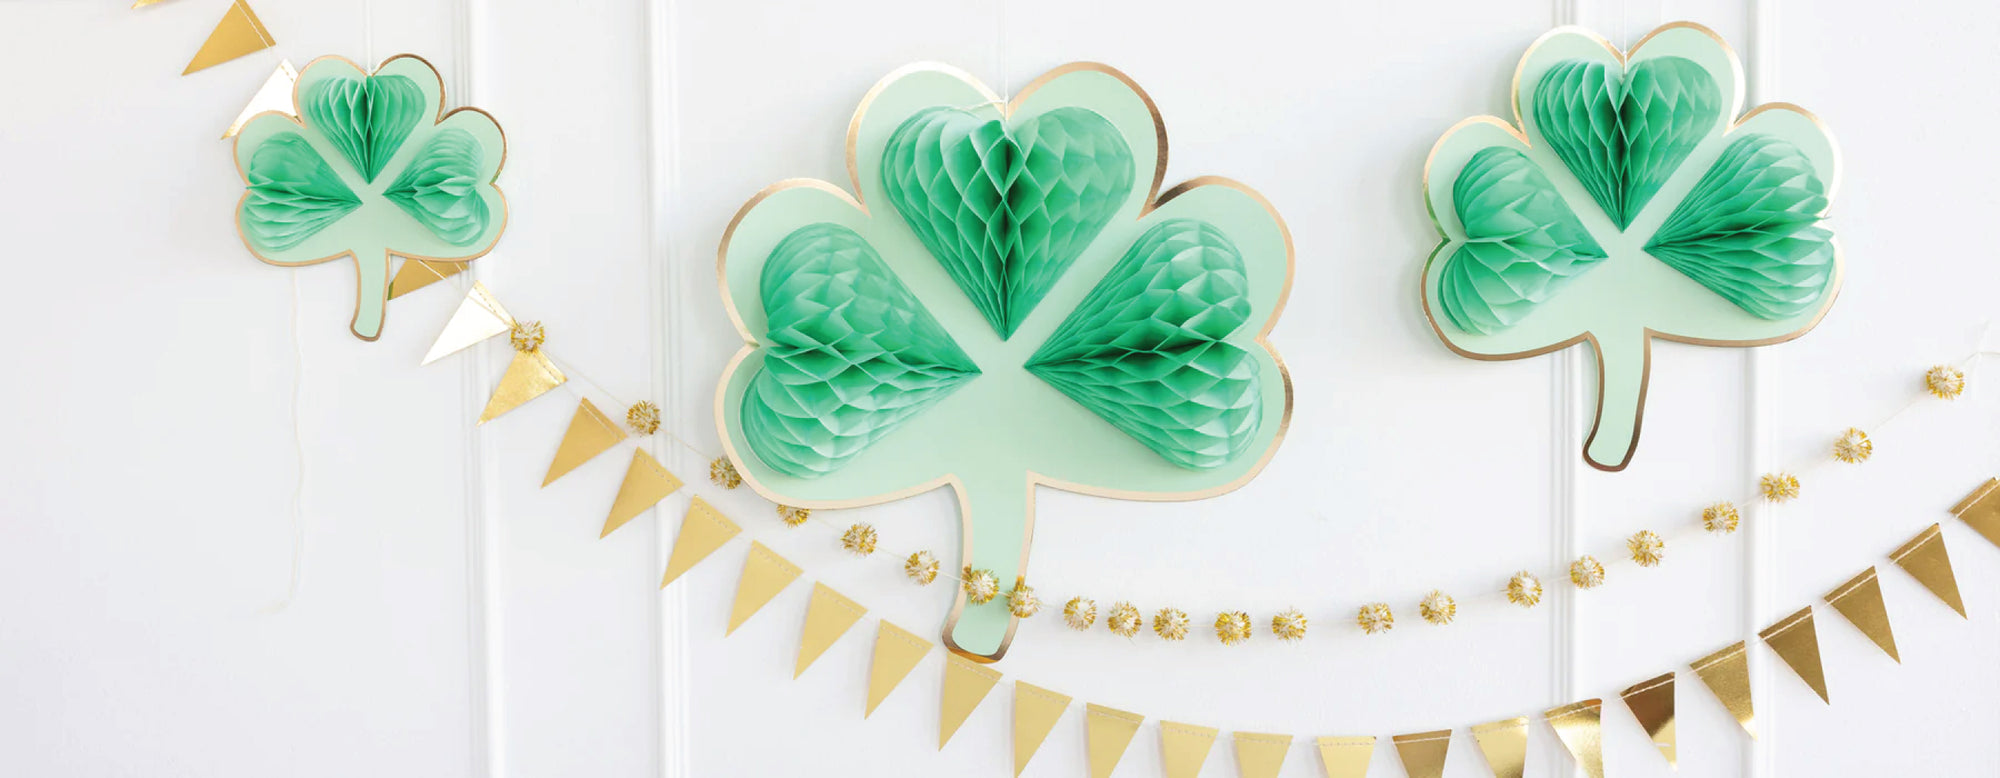 Honeycomb Shamrocks Hanging Decorations 3ct | The Party Darling